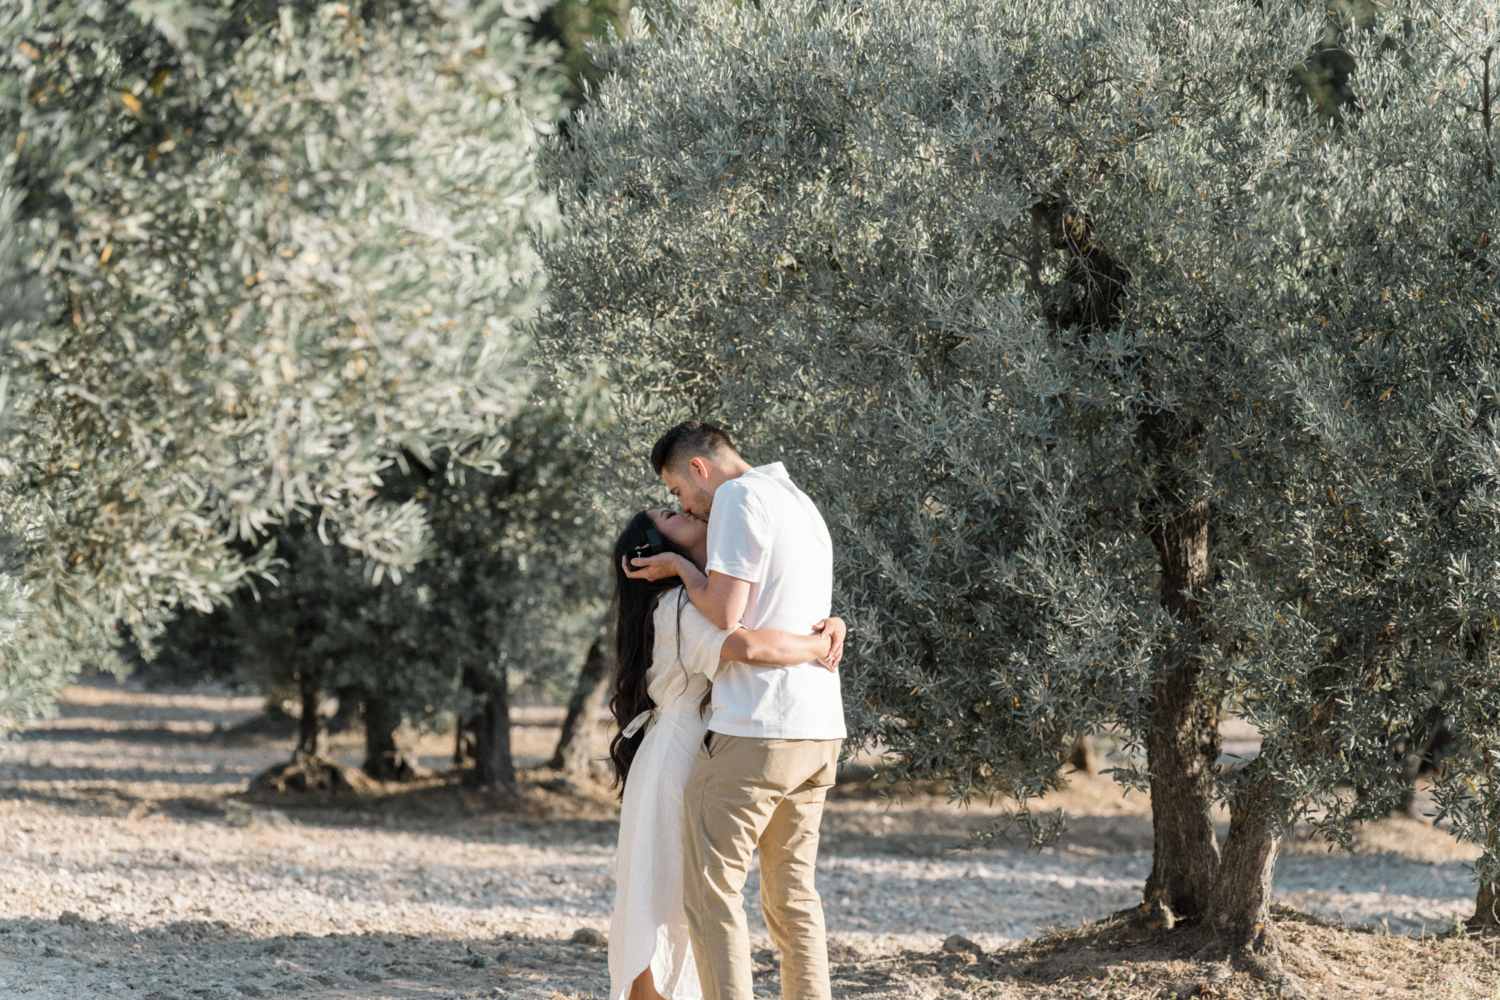 man proposes to woman in olive grove